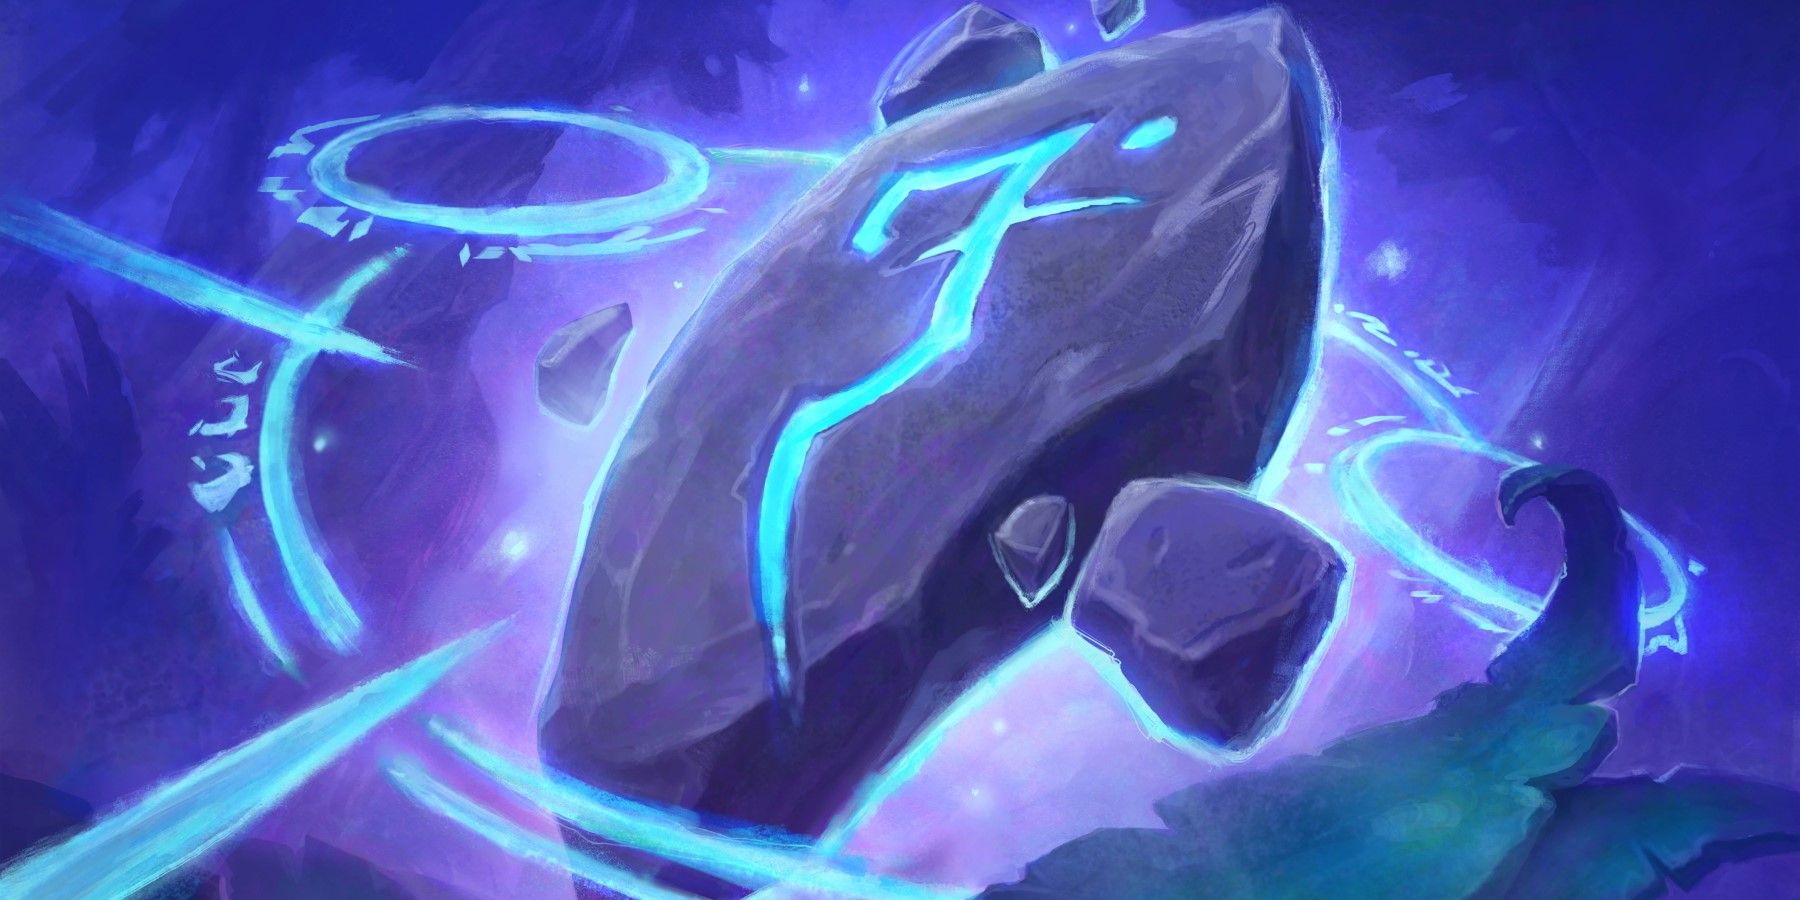 primordial glyph card from hearthston depicting a rock with a magic rune floating in an arcane circle